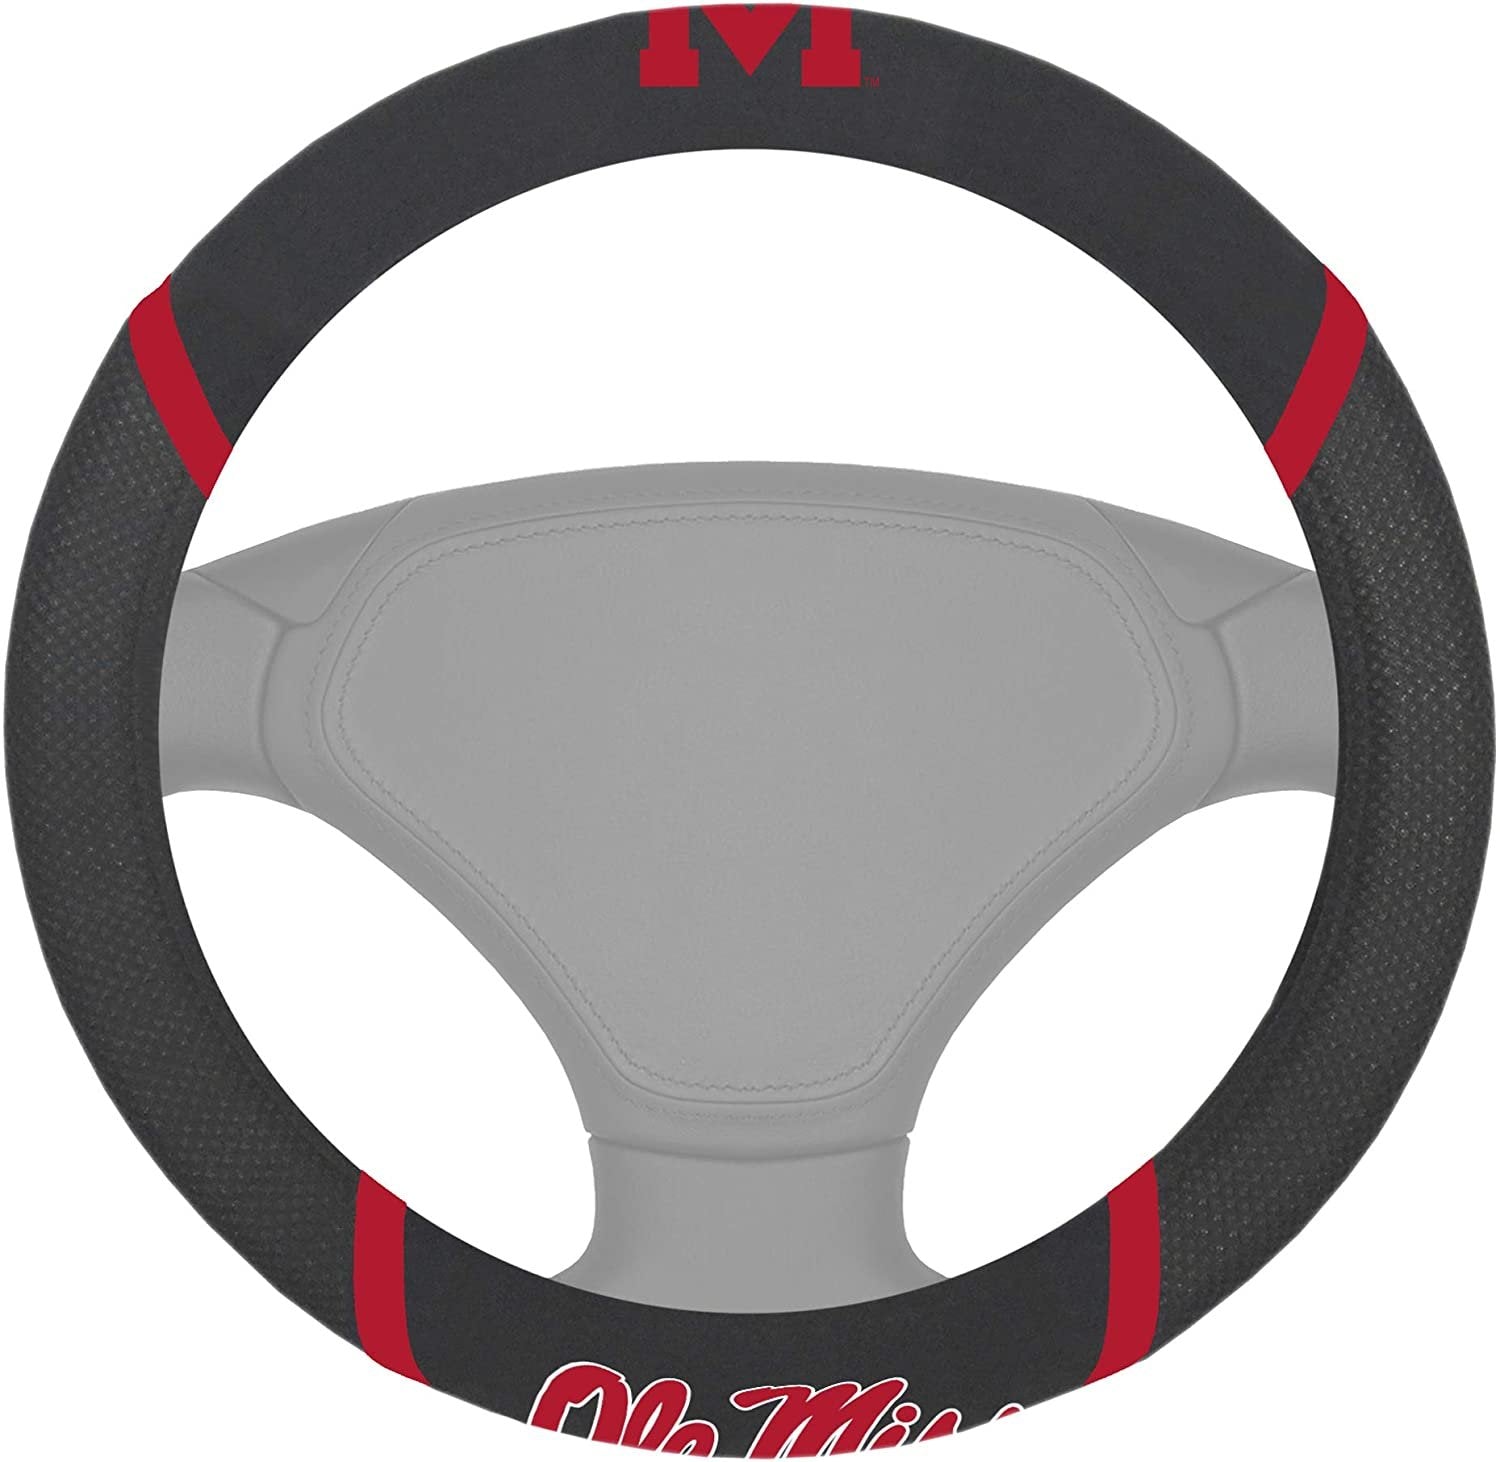 Mississippi Ole Miss Rebels Steering Wheel Cover Premium Embroidered Black 15 Inch University of